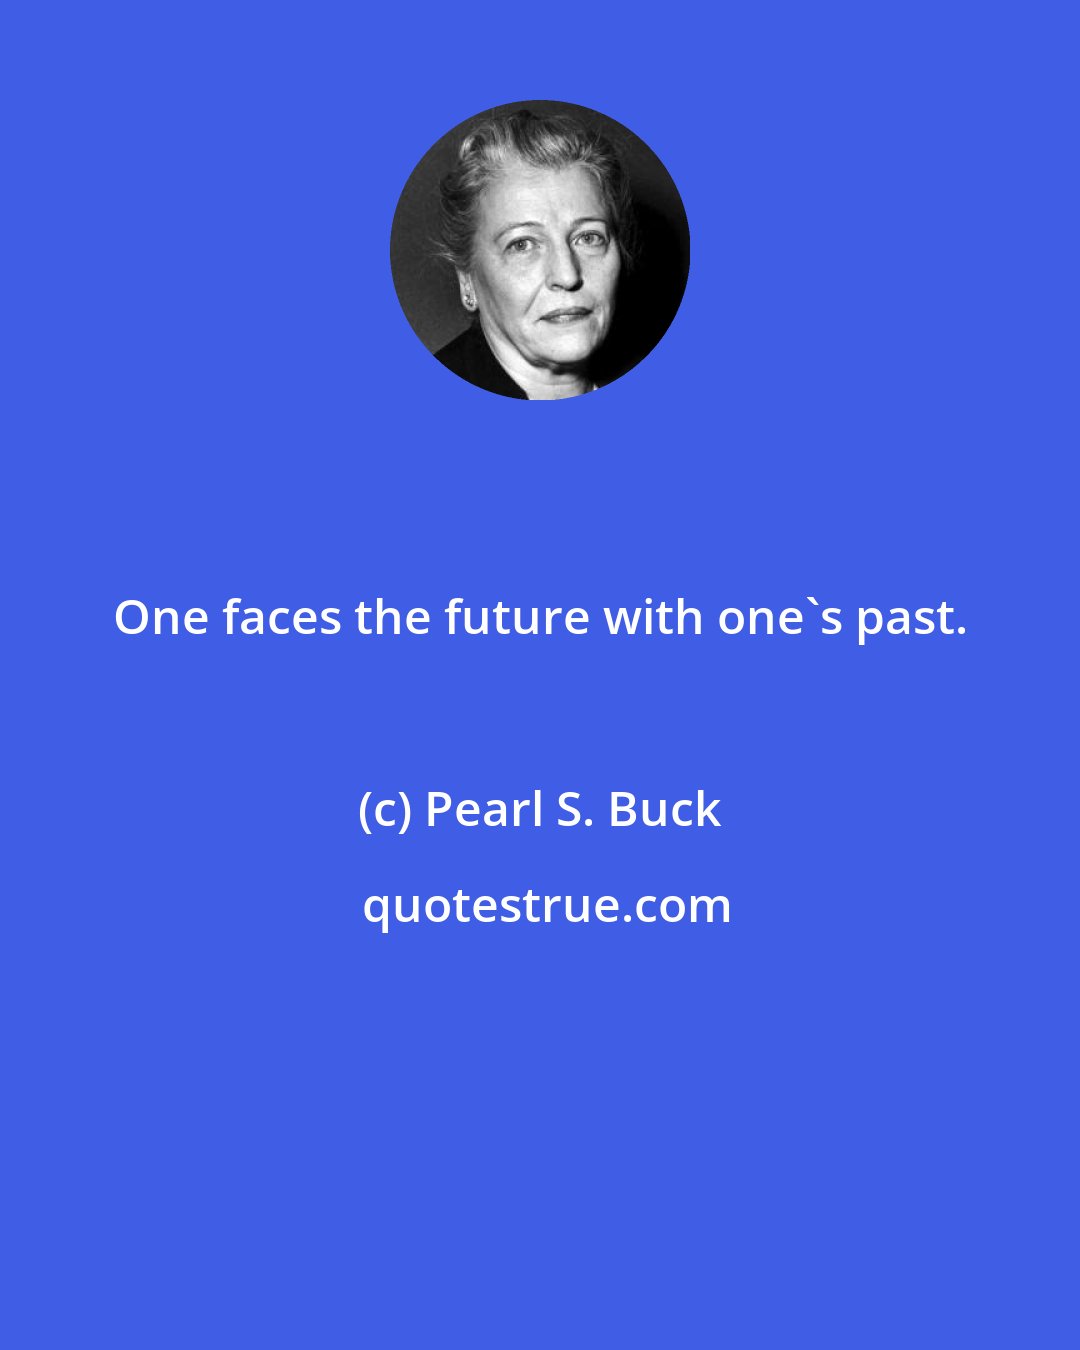 Pearl S. Buck: One faces the future with one's past.